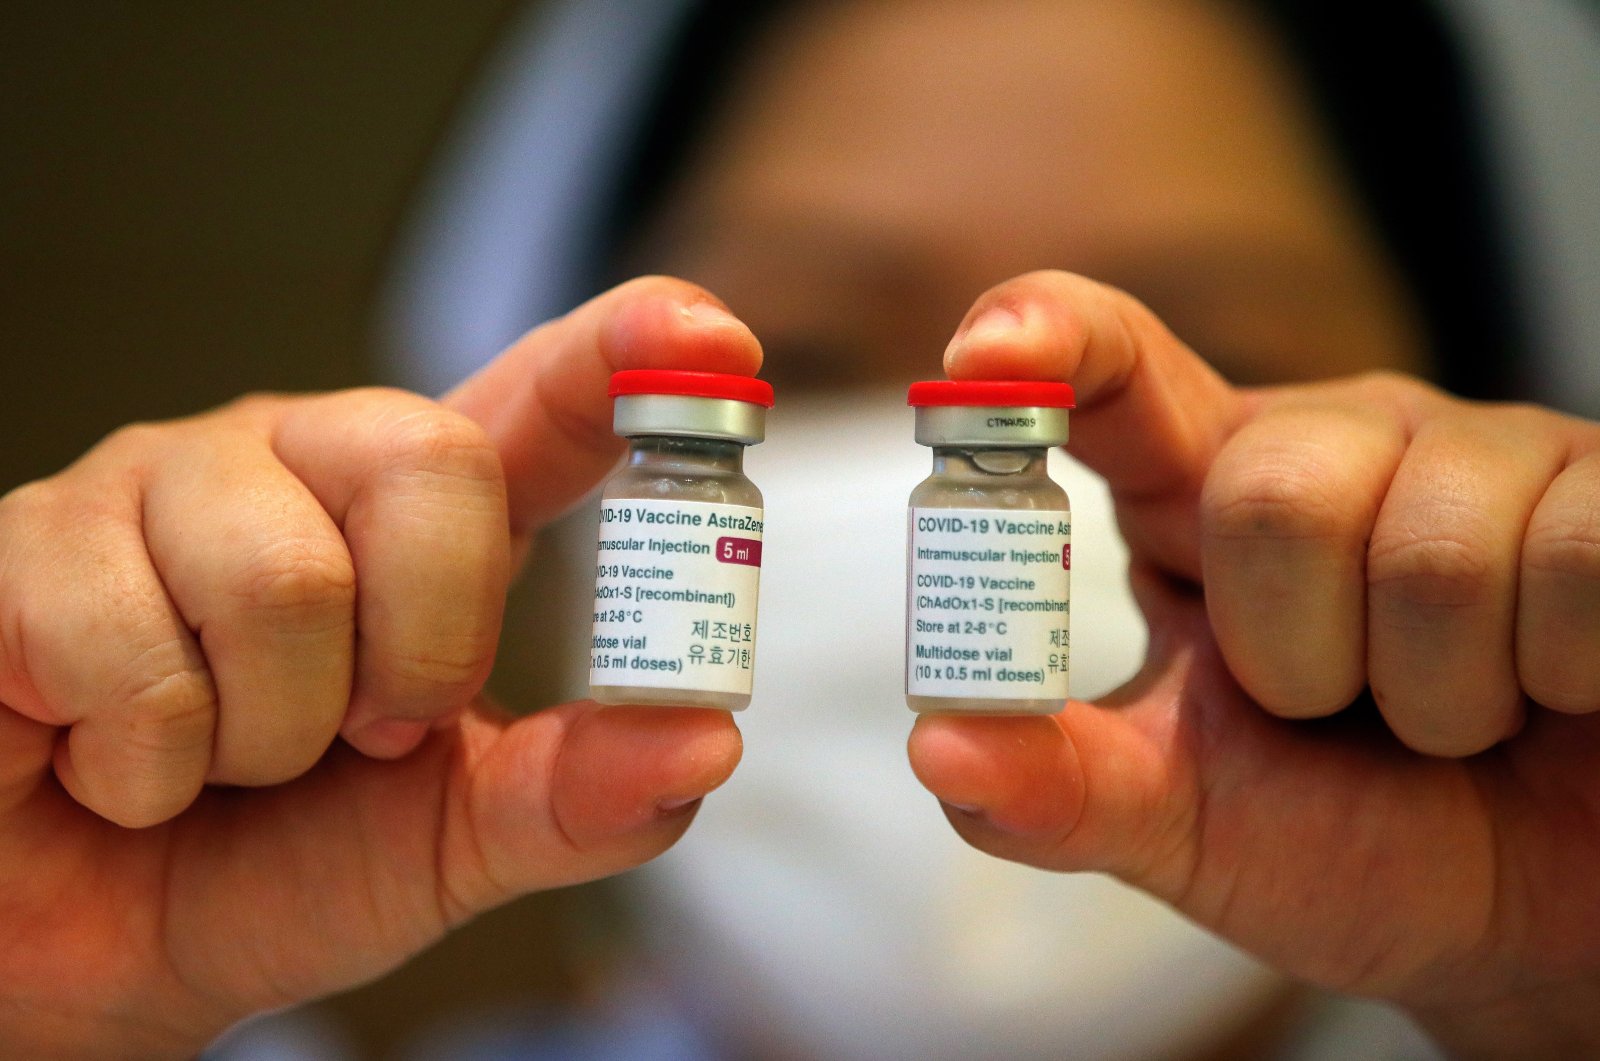 A Thai nurse displays vials of vaccine against COVID-19 developed by AstraZeneca after the cancelation and postponement of the vaccination event for the prime minister and cabinet ministers due to reports of side effects, at Bamrasnaradura Infectious Diseases Institute in Nonthaburi province, Thailand, March 12, 2021. (EPA Photo)